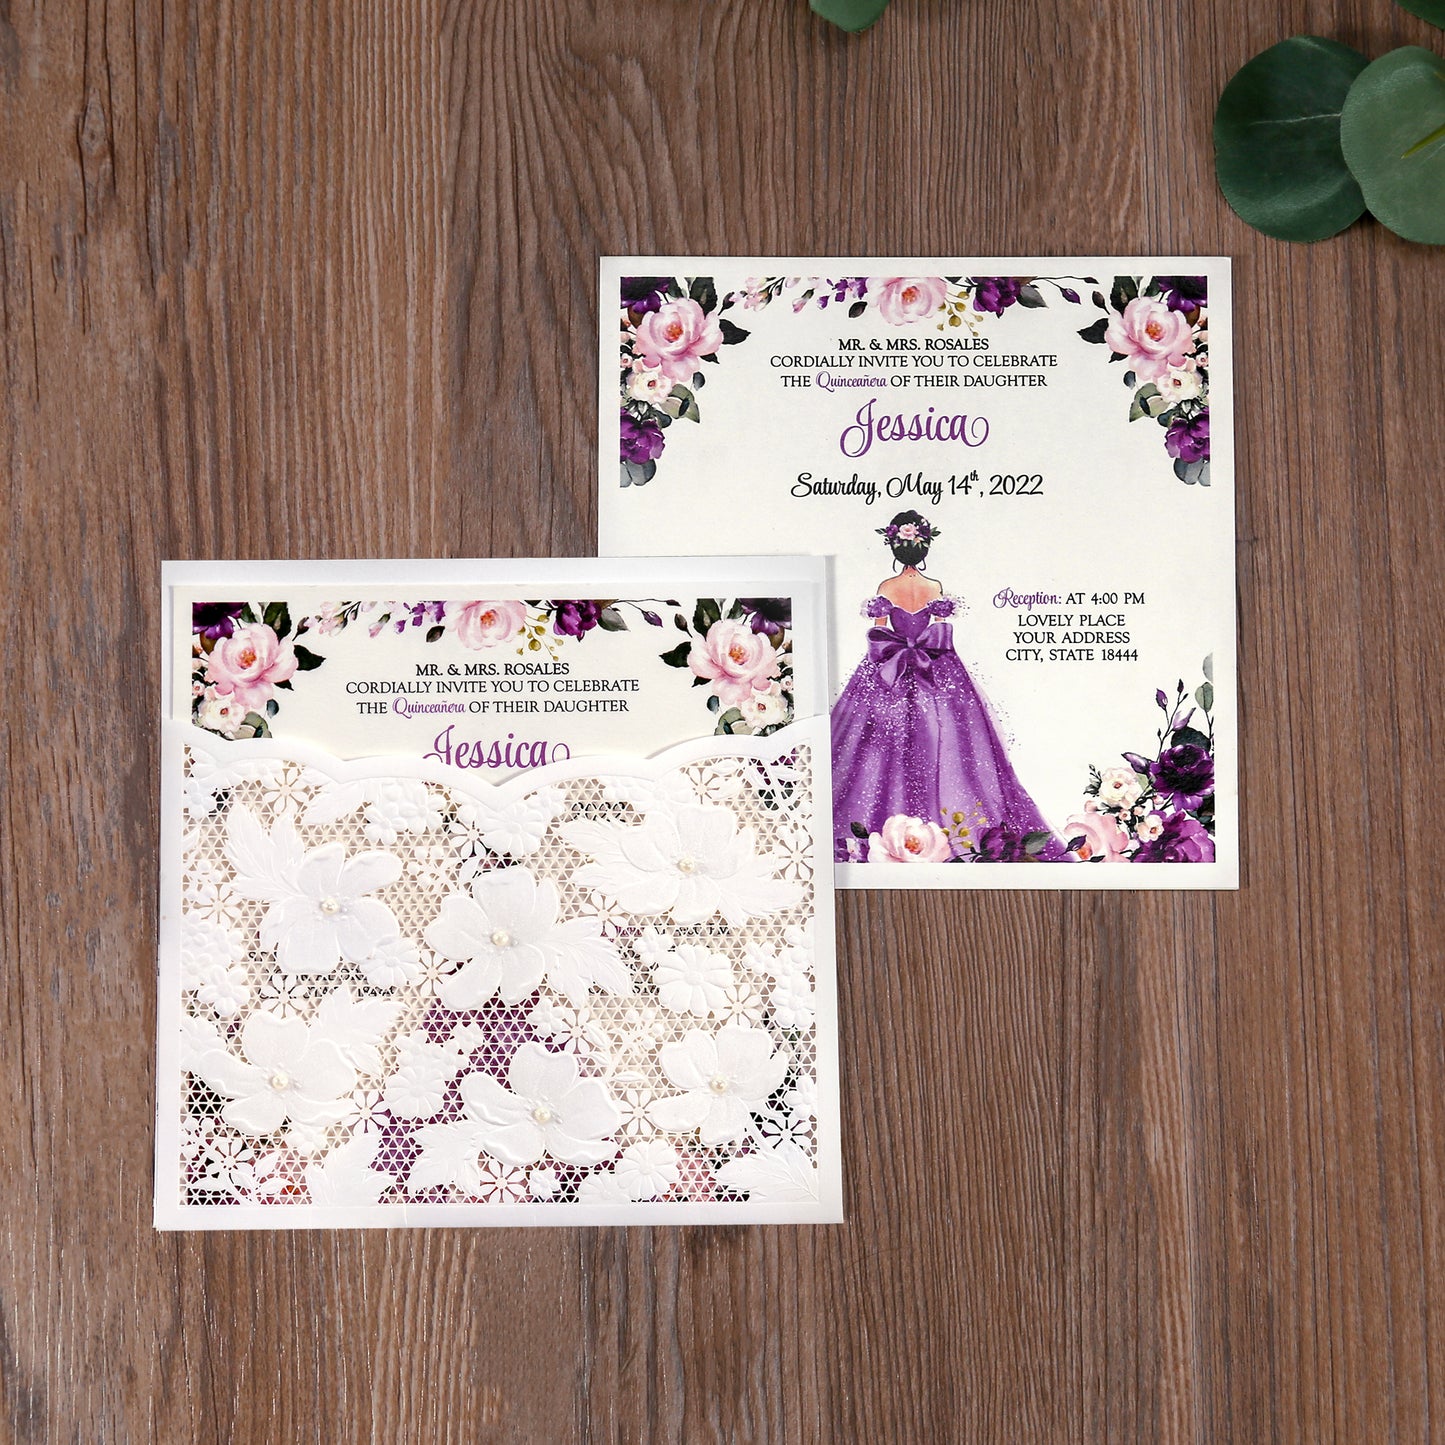 Ivory White Small Pearl Lace Invitations with Purple Design for Quinceanera